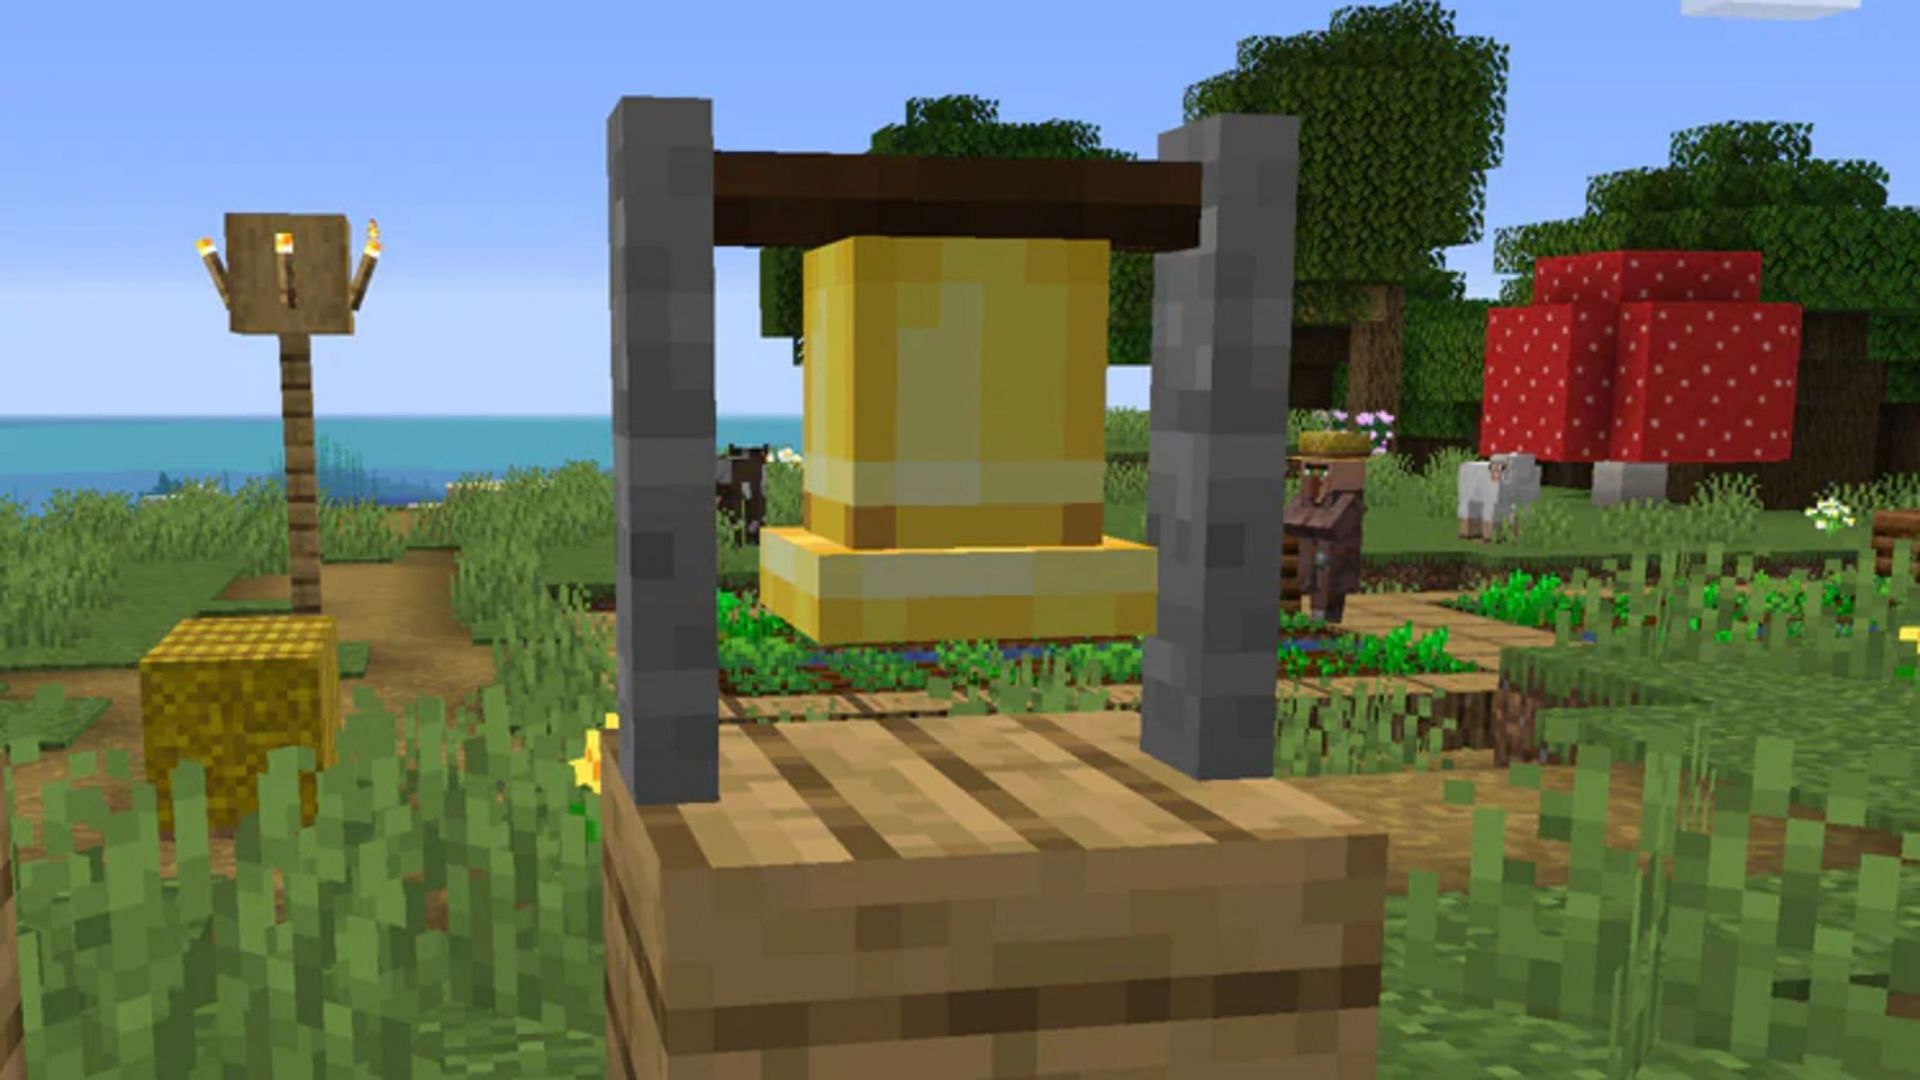 Bells can often be found at Minecraft village centers (Image via Mojang)